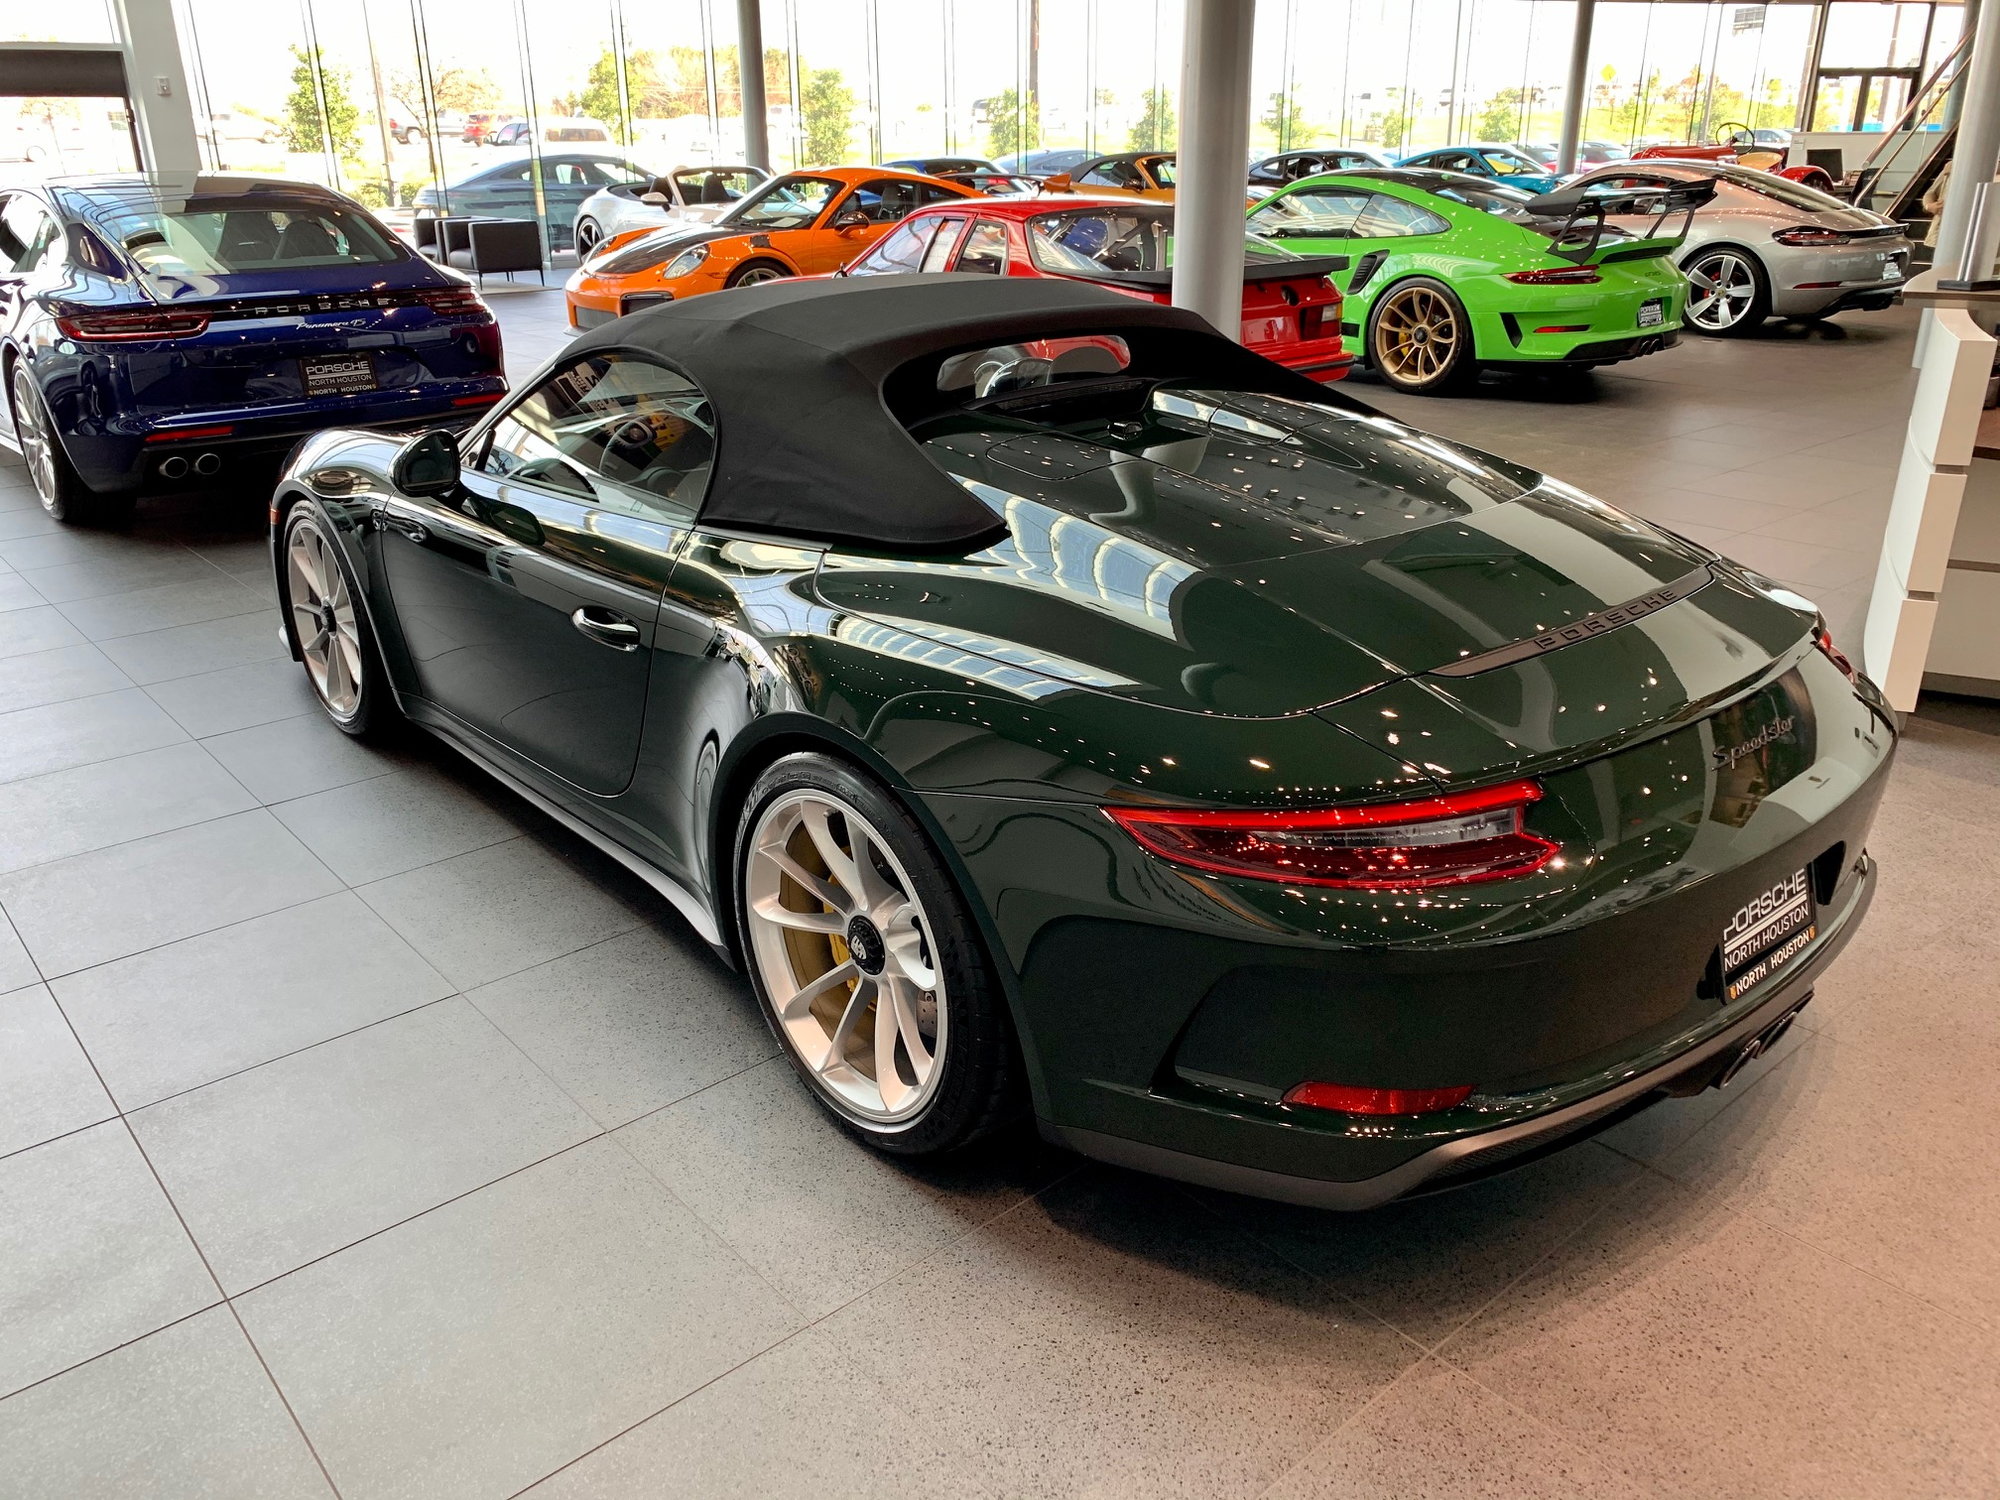 2019 Porsche 911 - 2019 911 Speedster PTS Brewster Green - Used - VIN WP0CF2A98KS172384 - 15 Miles - 6 cyl - 2WD - Manual - Convertible - Other - Houston, TX 77090, United States